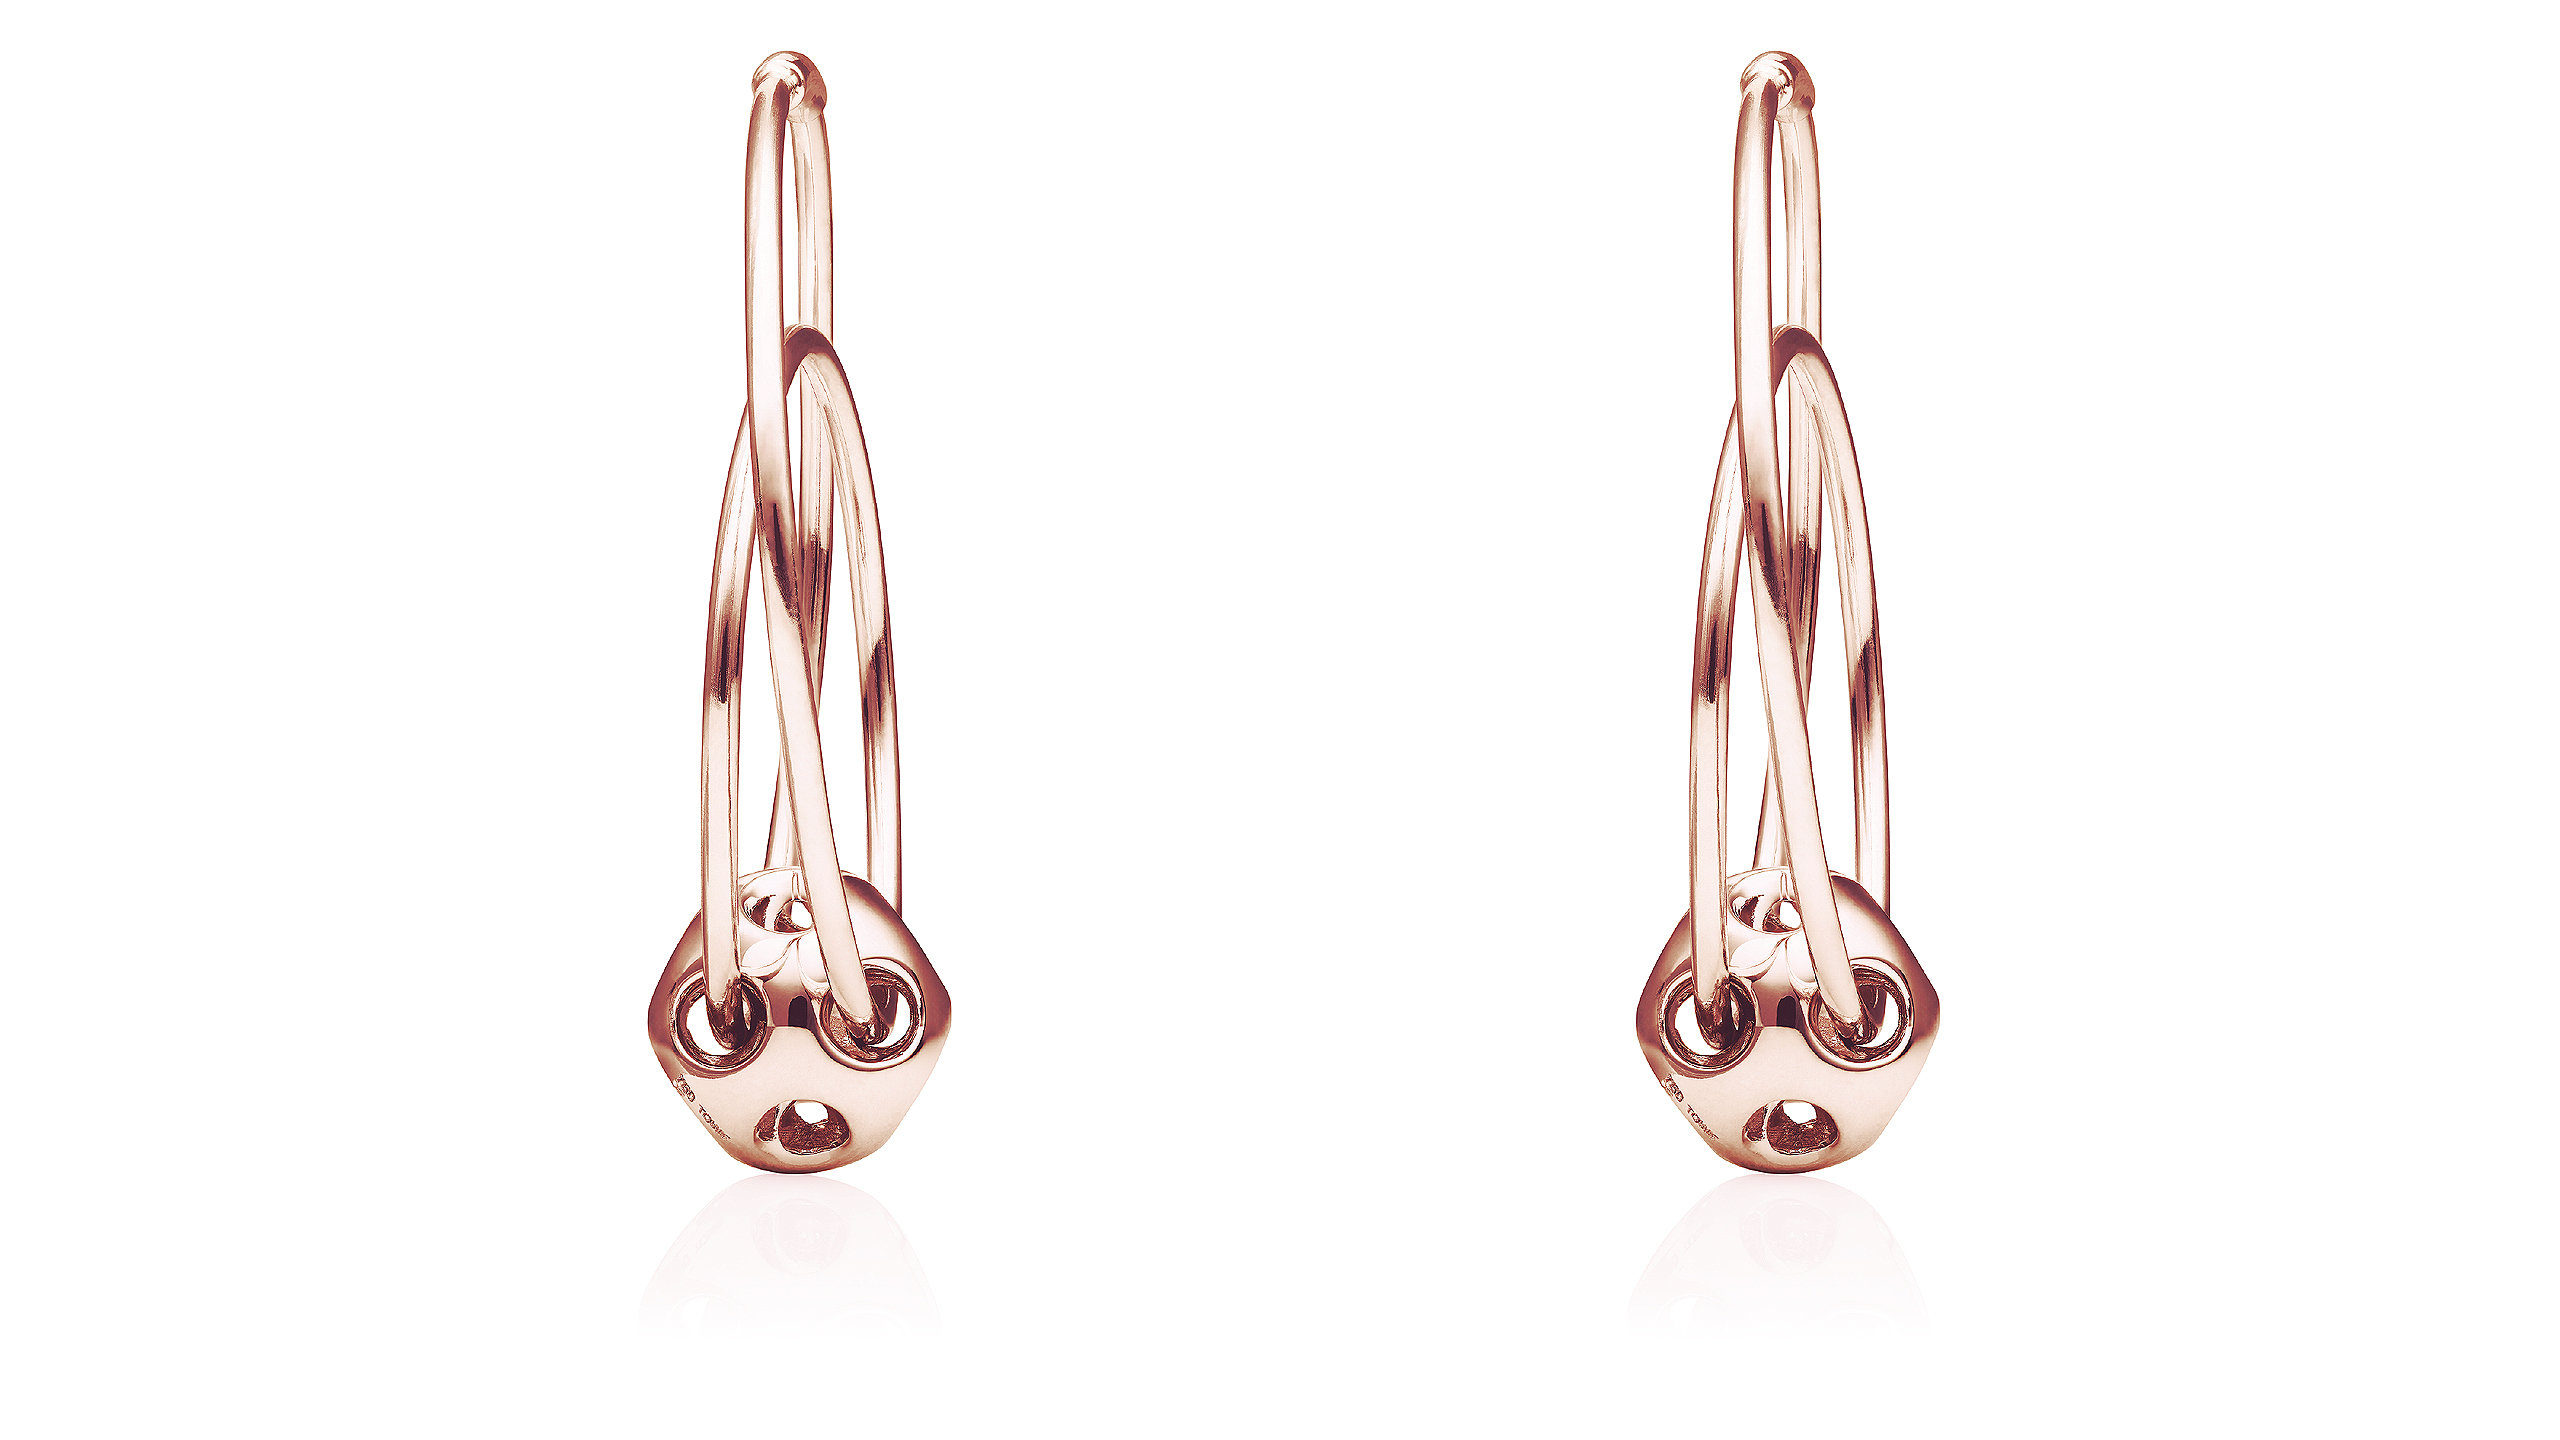 https://towejewels.com/wp-content/uploads/2015/11/magic_earr_W_Gold_front2015-10-18-17_OK_pink_AB_2560x1440_frontview_web.jpg